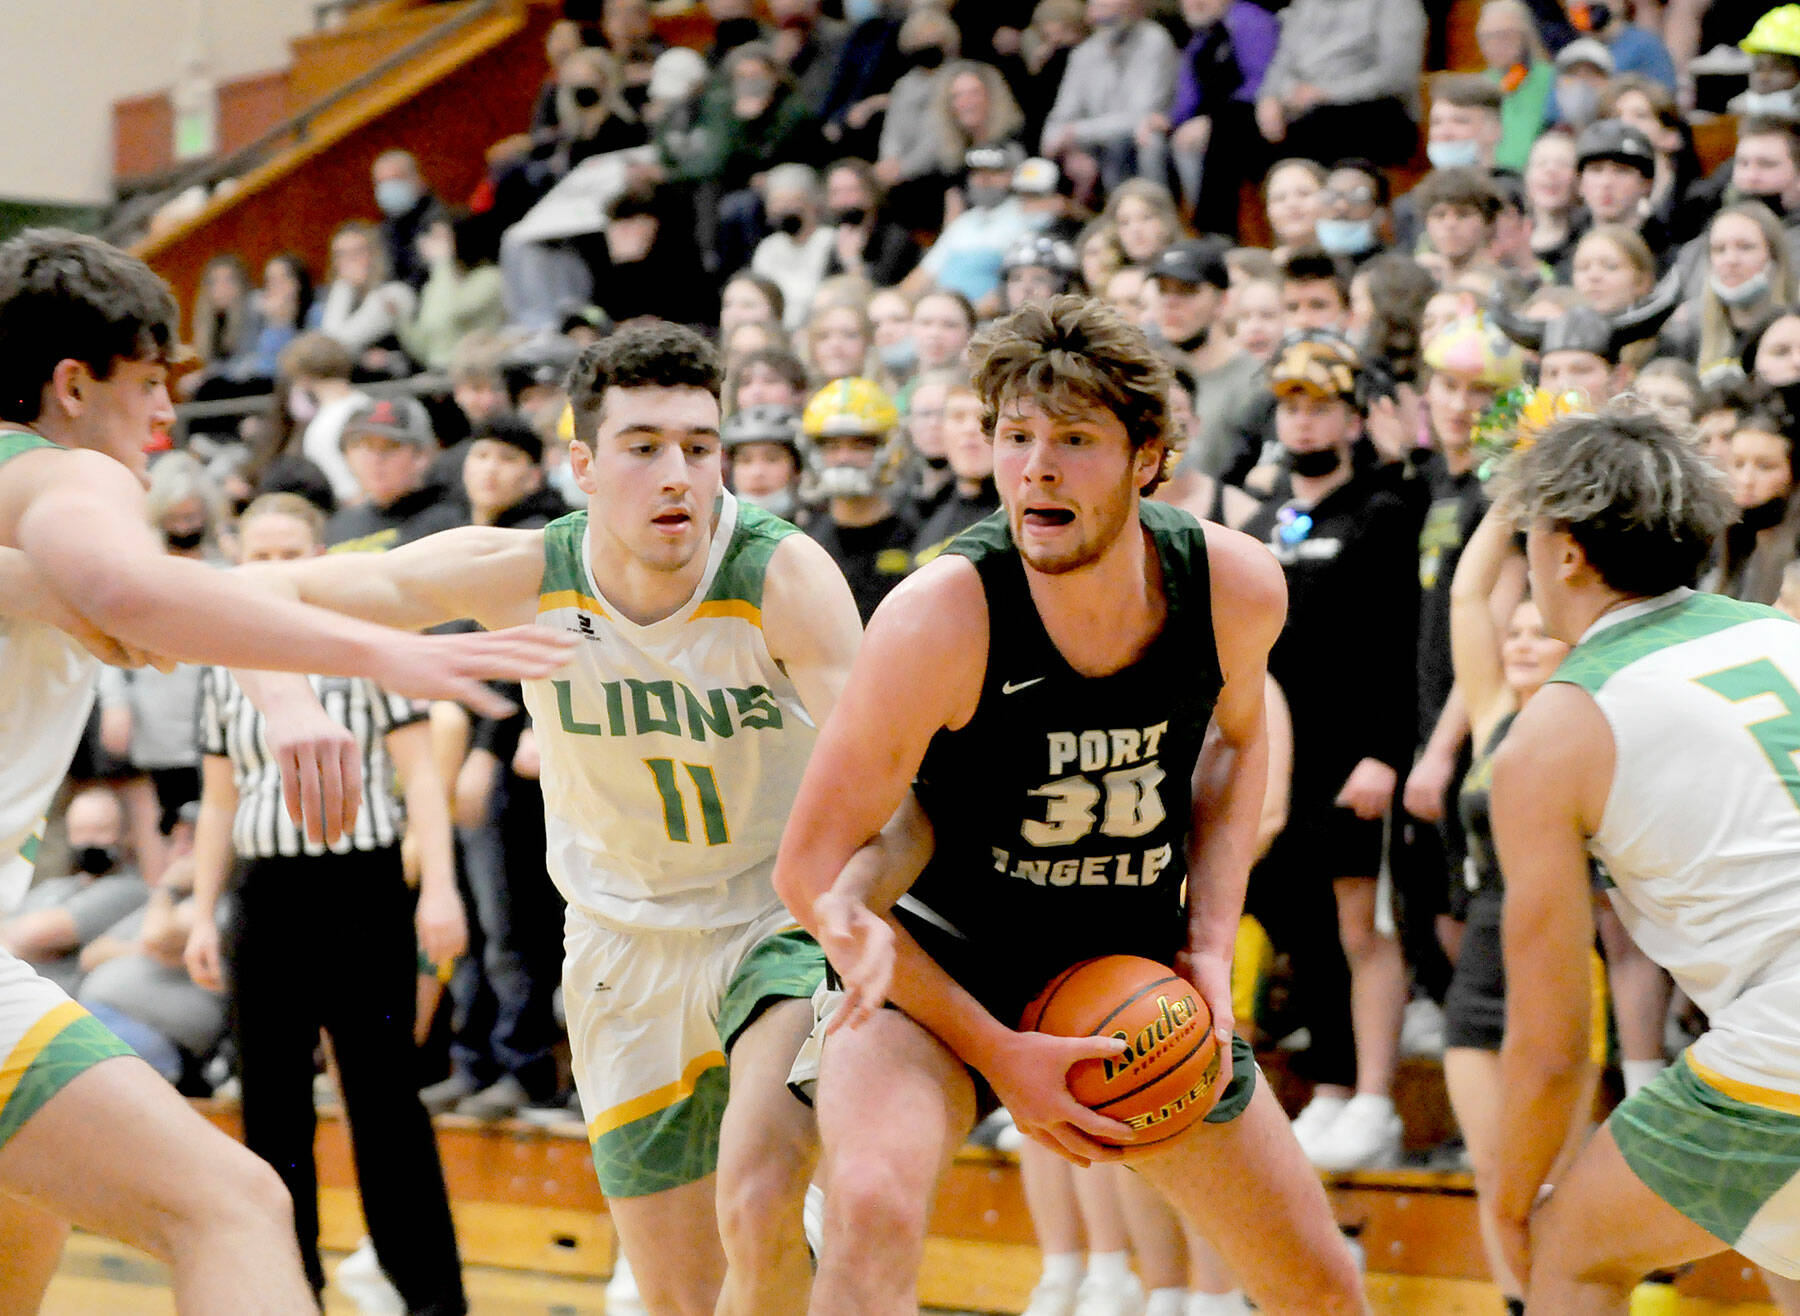 Port Angeles’ Wyatt Dunning, center, is surrounded by Lynden players during a state regional round game at Mount Vernon High School. Dunning is the All-Peninsula Boys Basketball MVP as selected by the Peninsula Daily News sports staff.
Michael Dashiell/Olympic Peninsula News Group